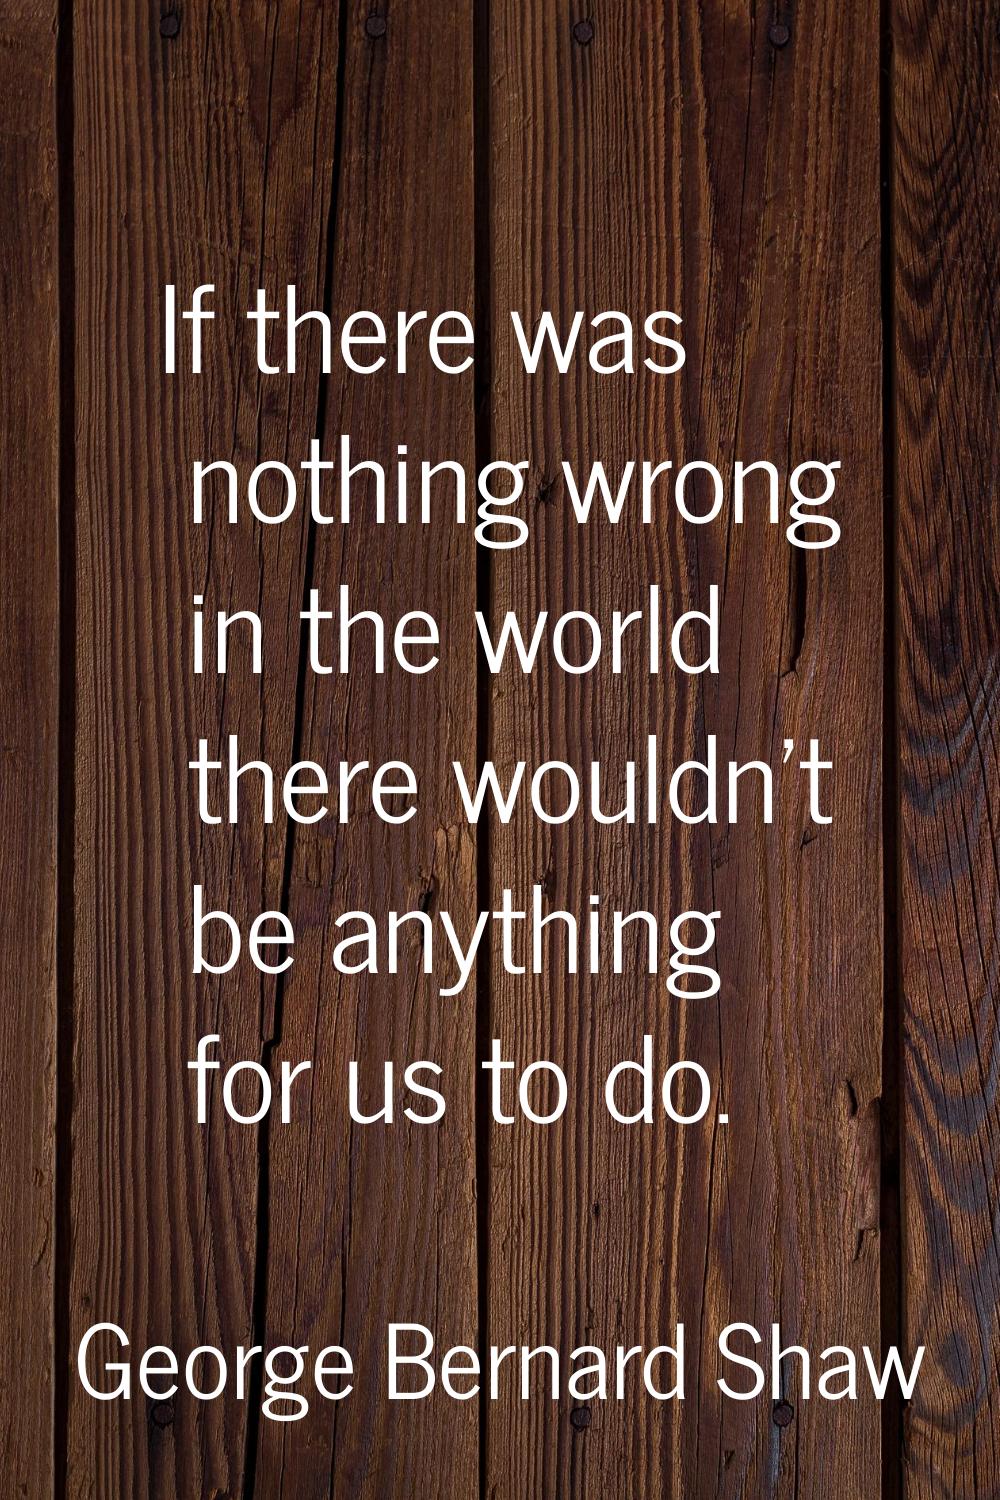 If there was nothing wrong in the world there wouldn't be anything for us to do.